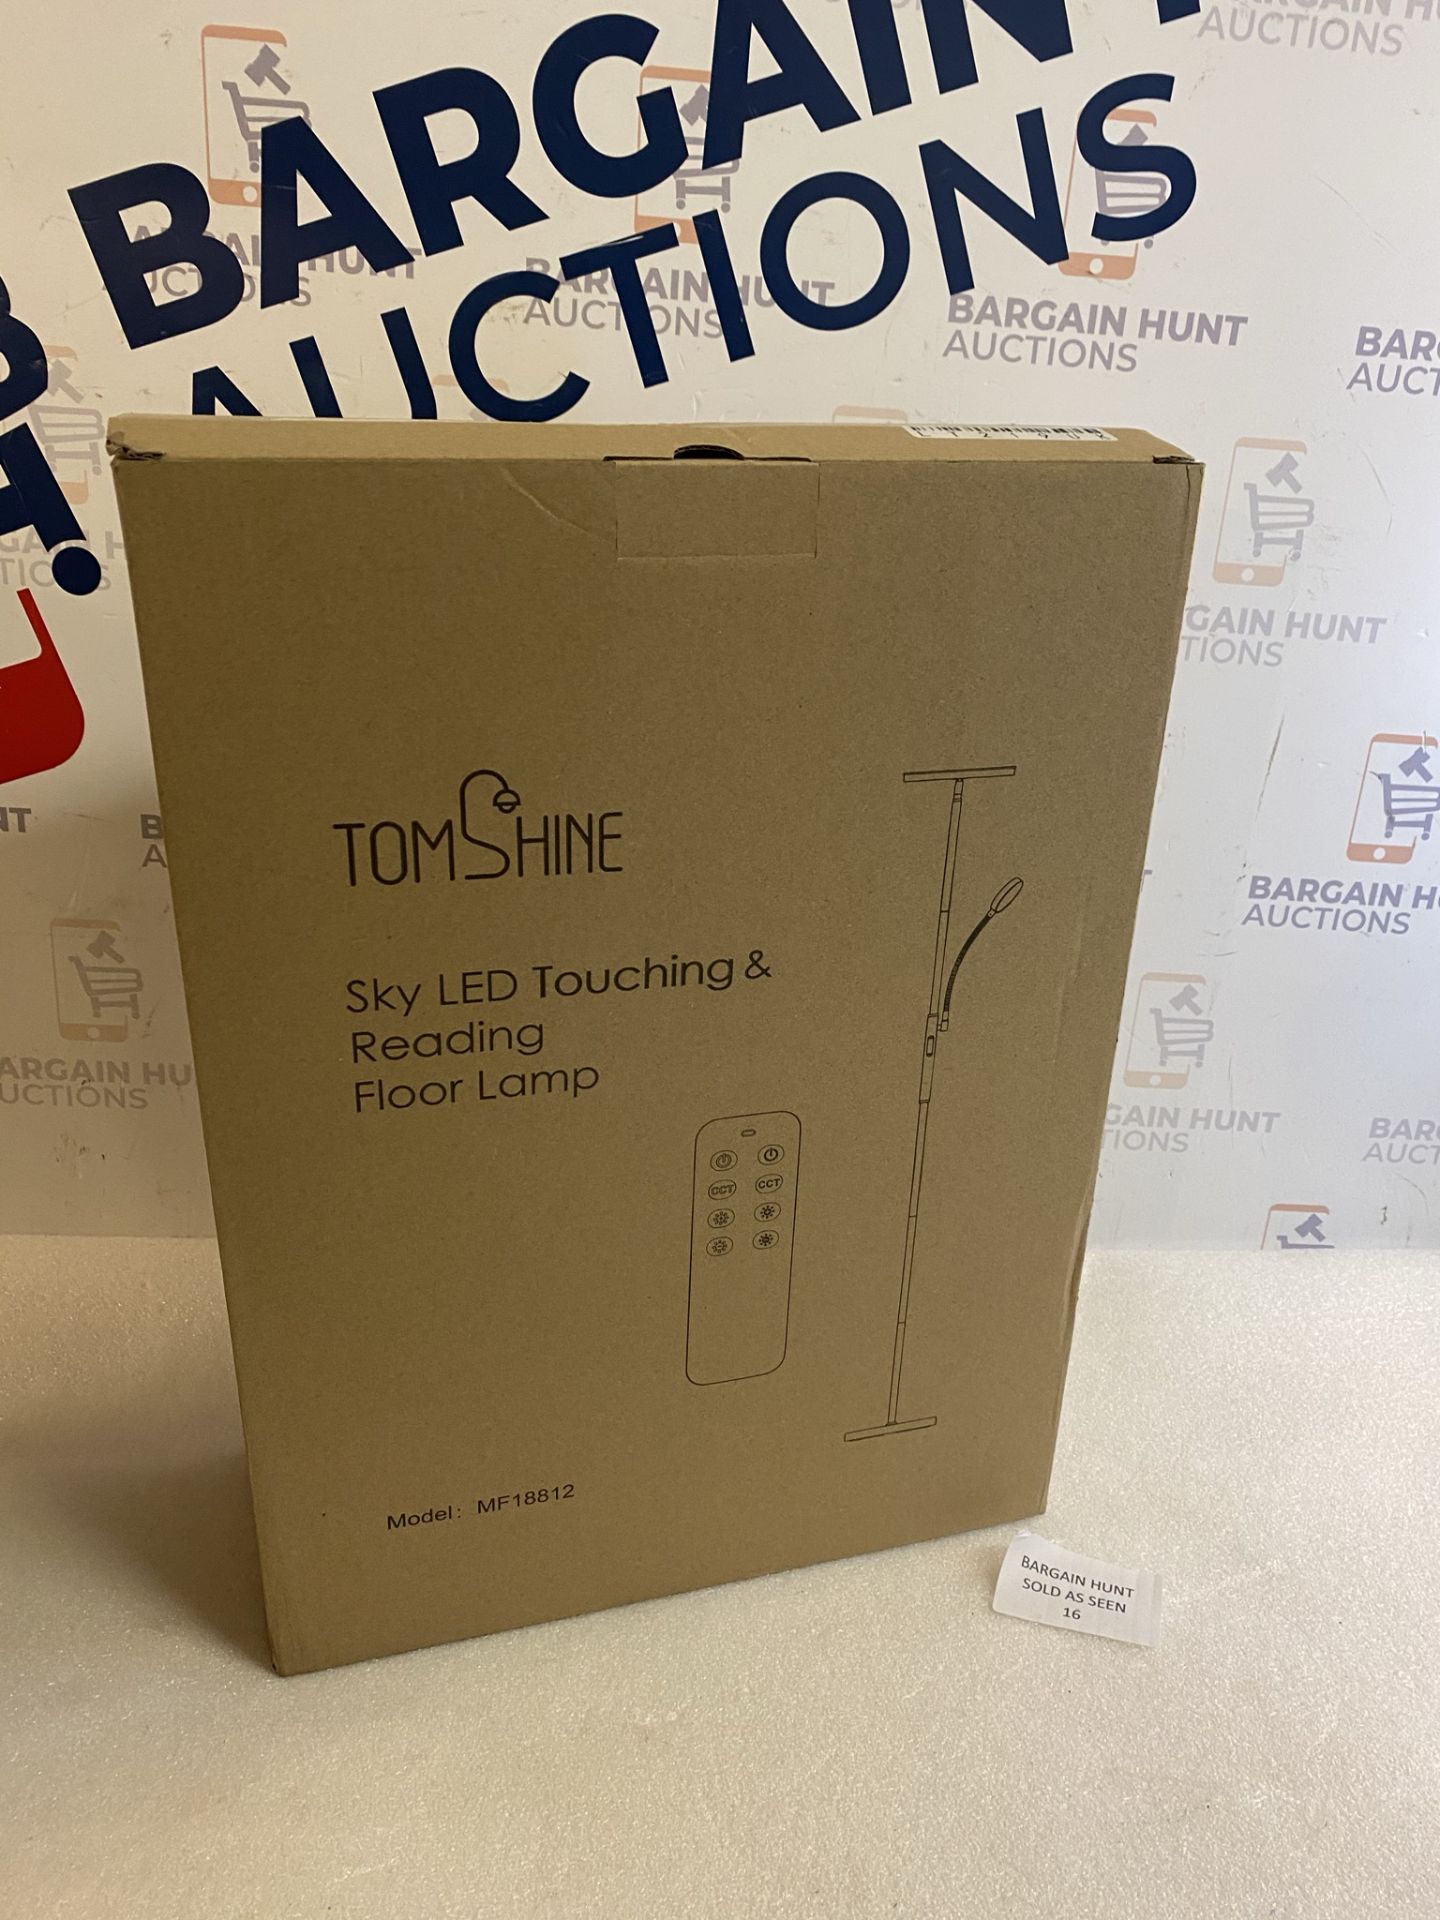 Tomshine Sky LED Touching & Reading Floor Lamp with Remote Control RRP £62.99 - Image 2 of 2